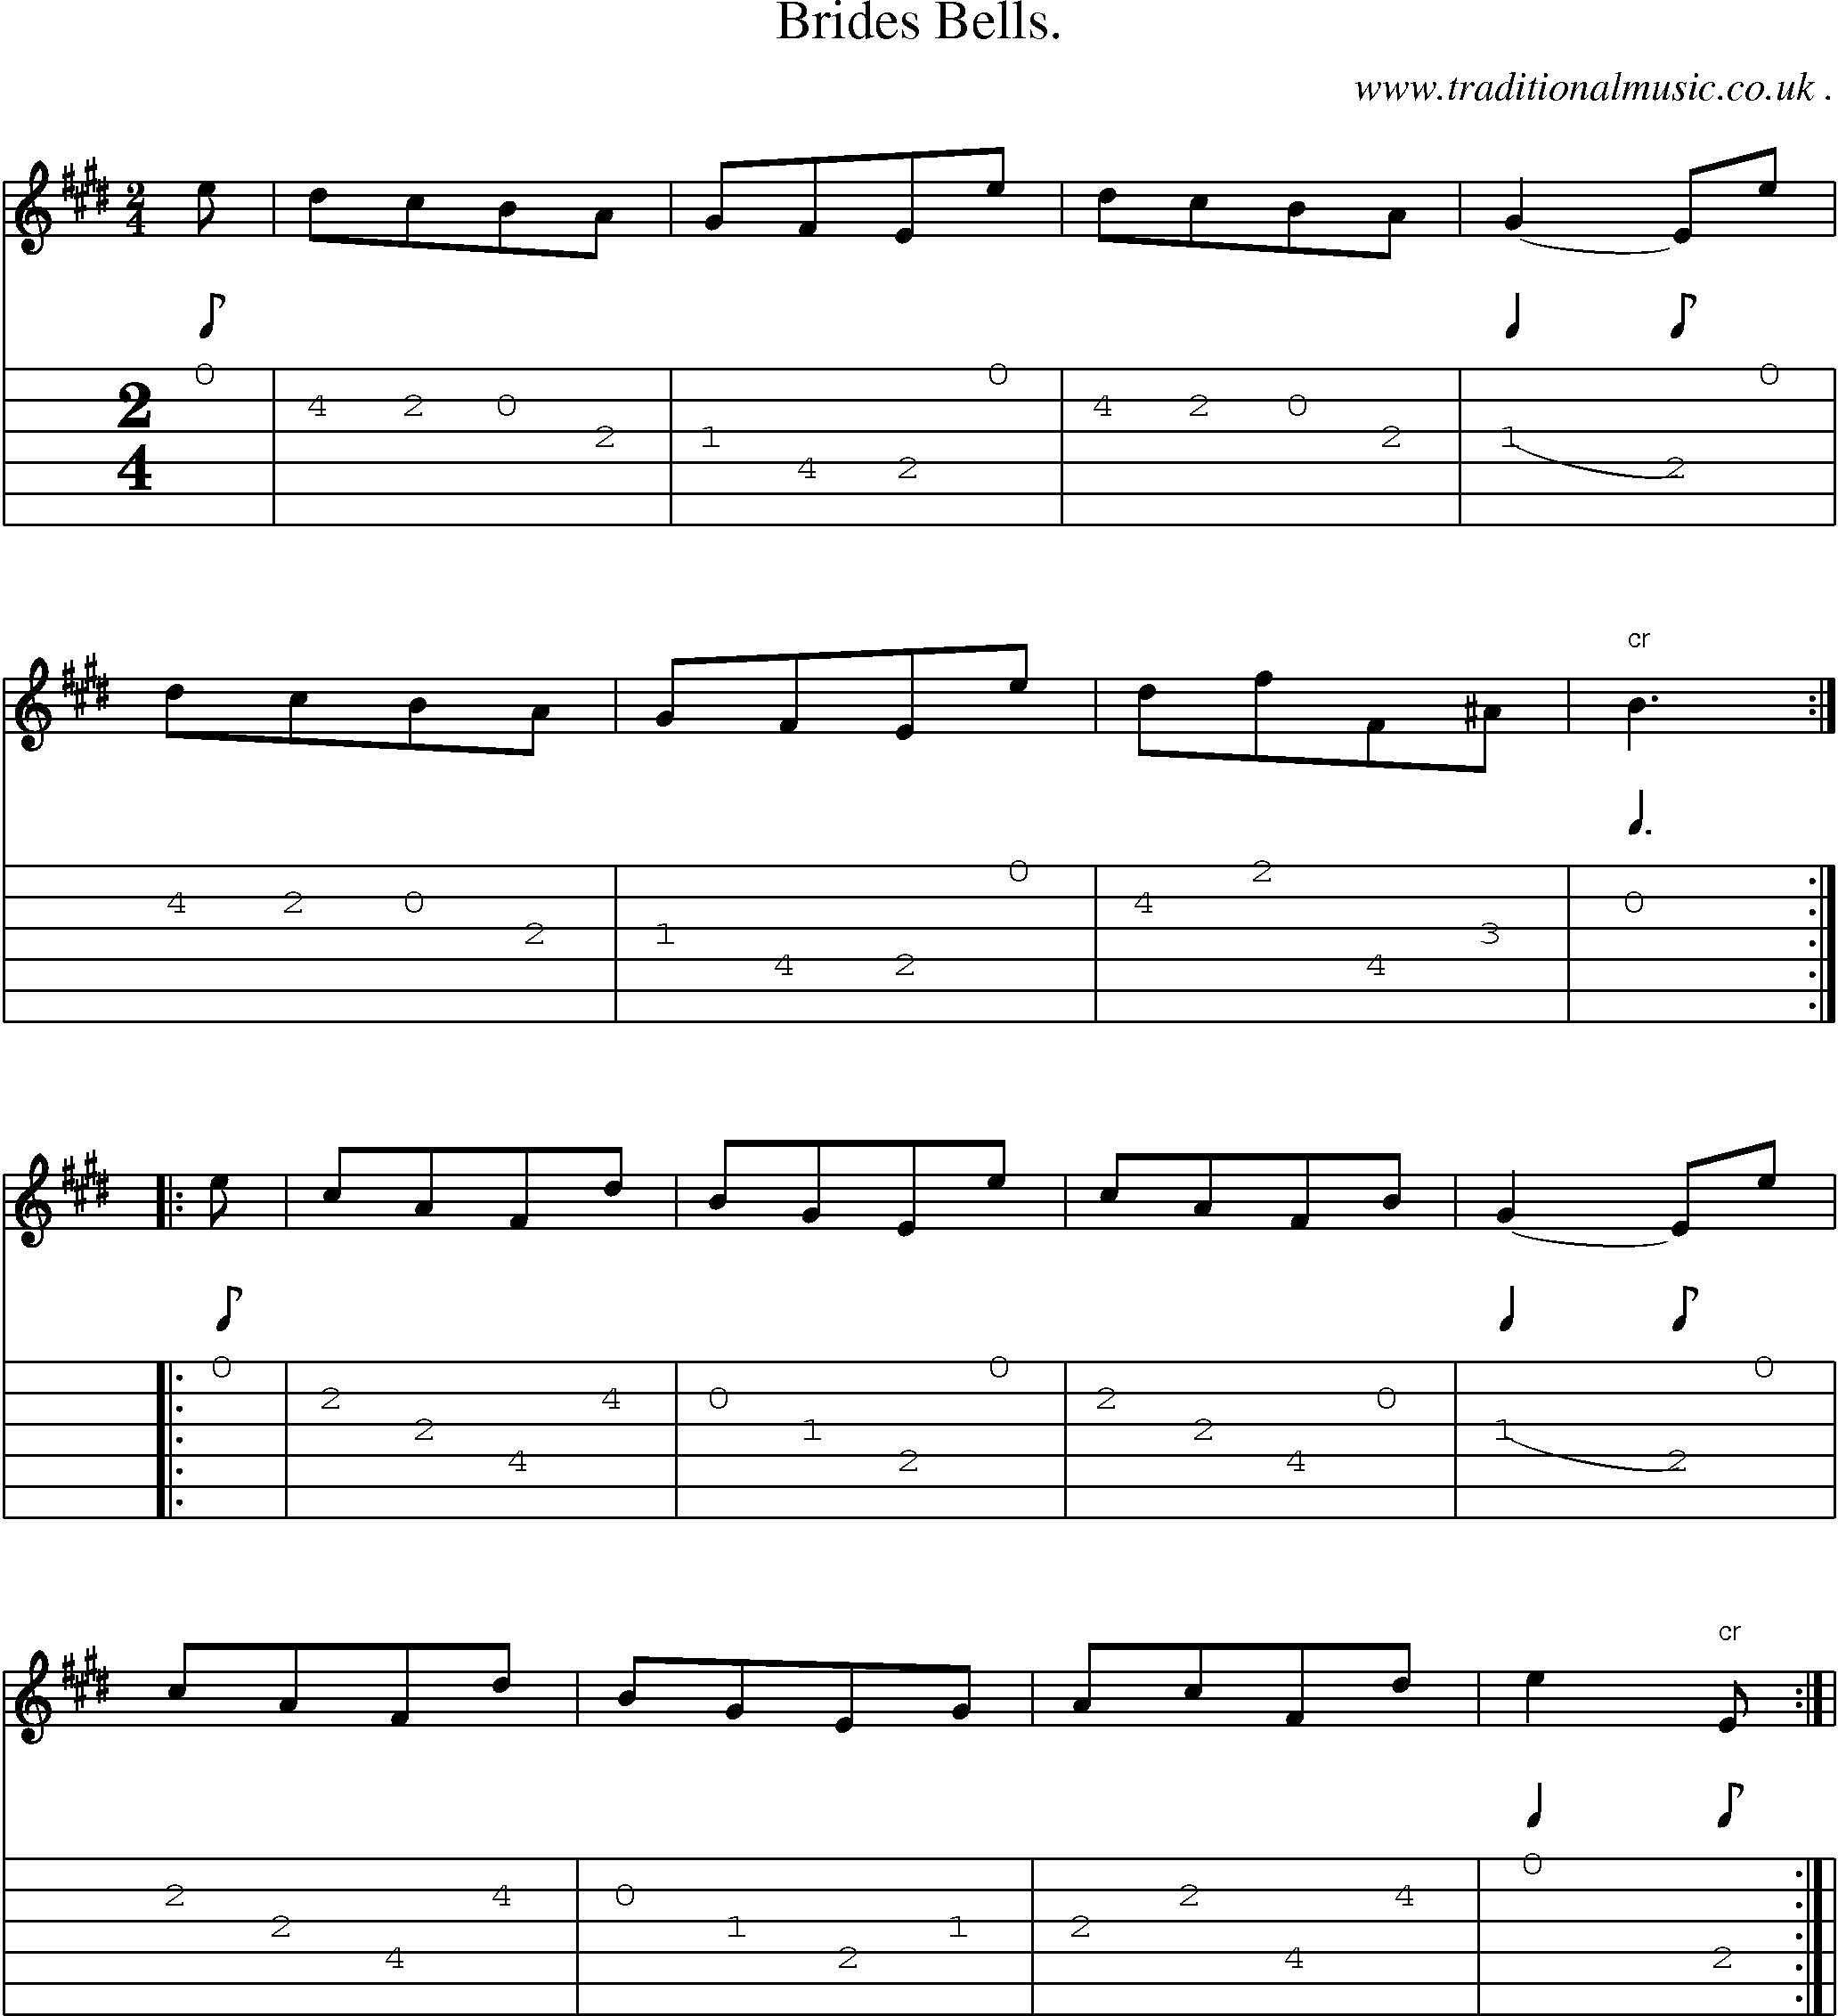 Sheet-Music and Guitar Tabs for Brides Bells